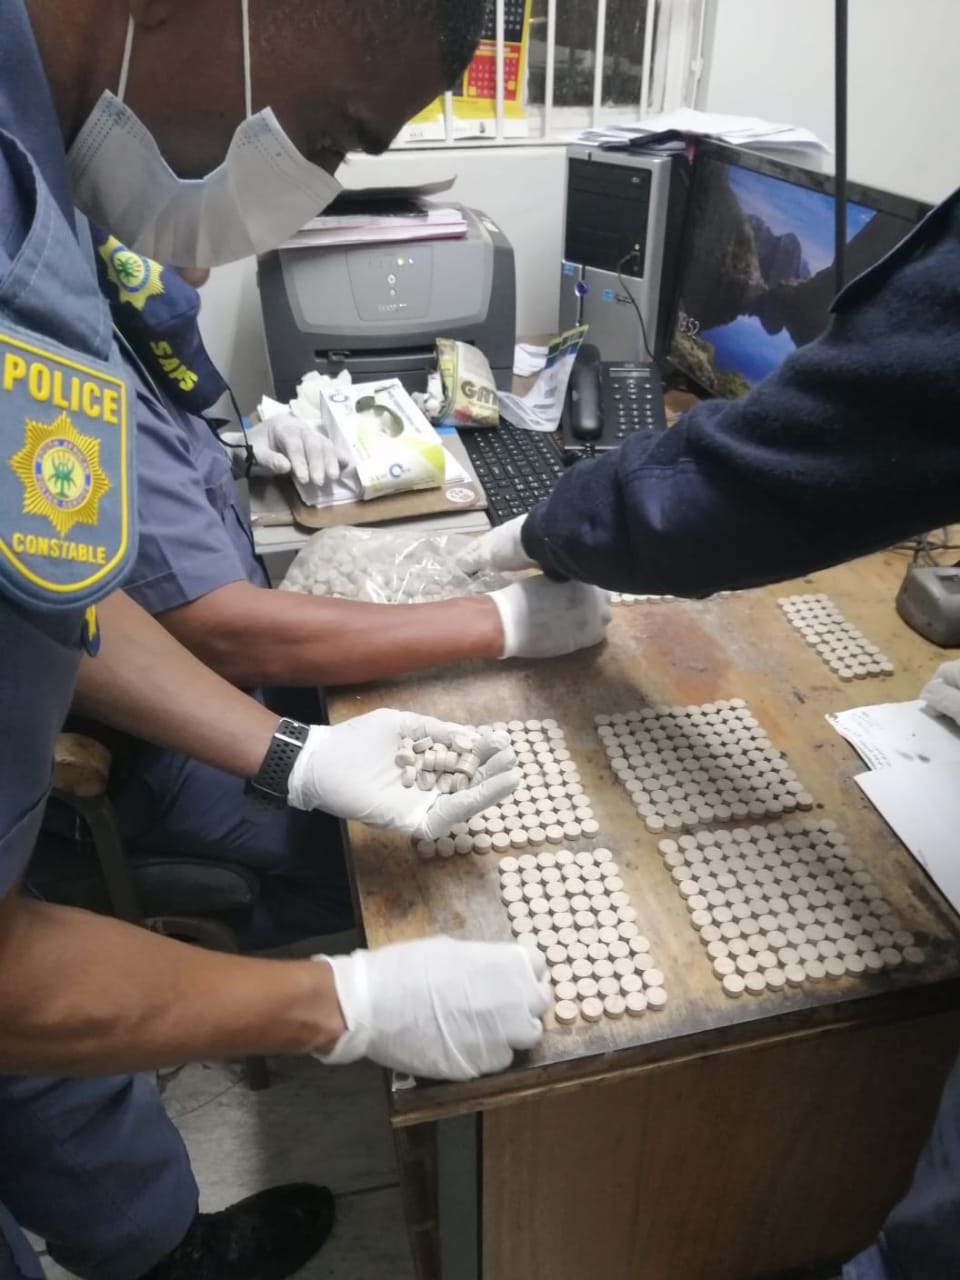 Police confiscates drugs worth R50 000 in Calitzdorp